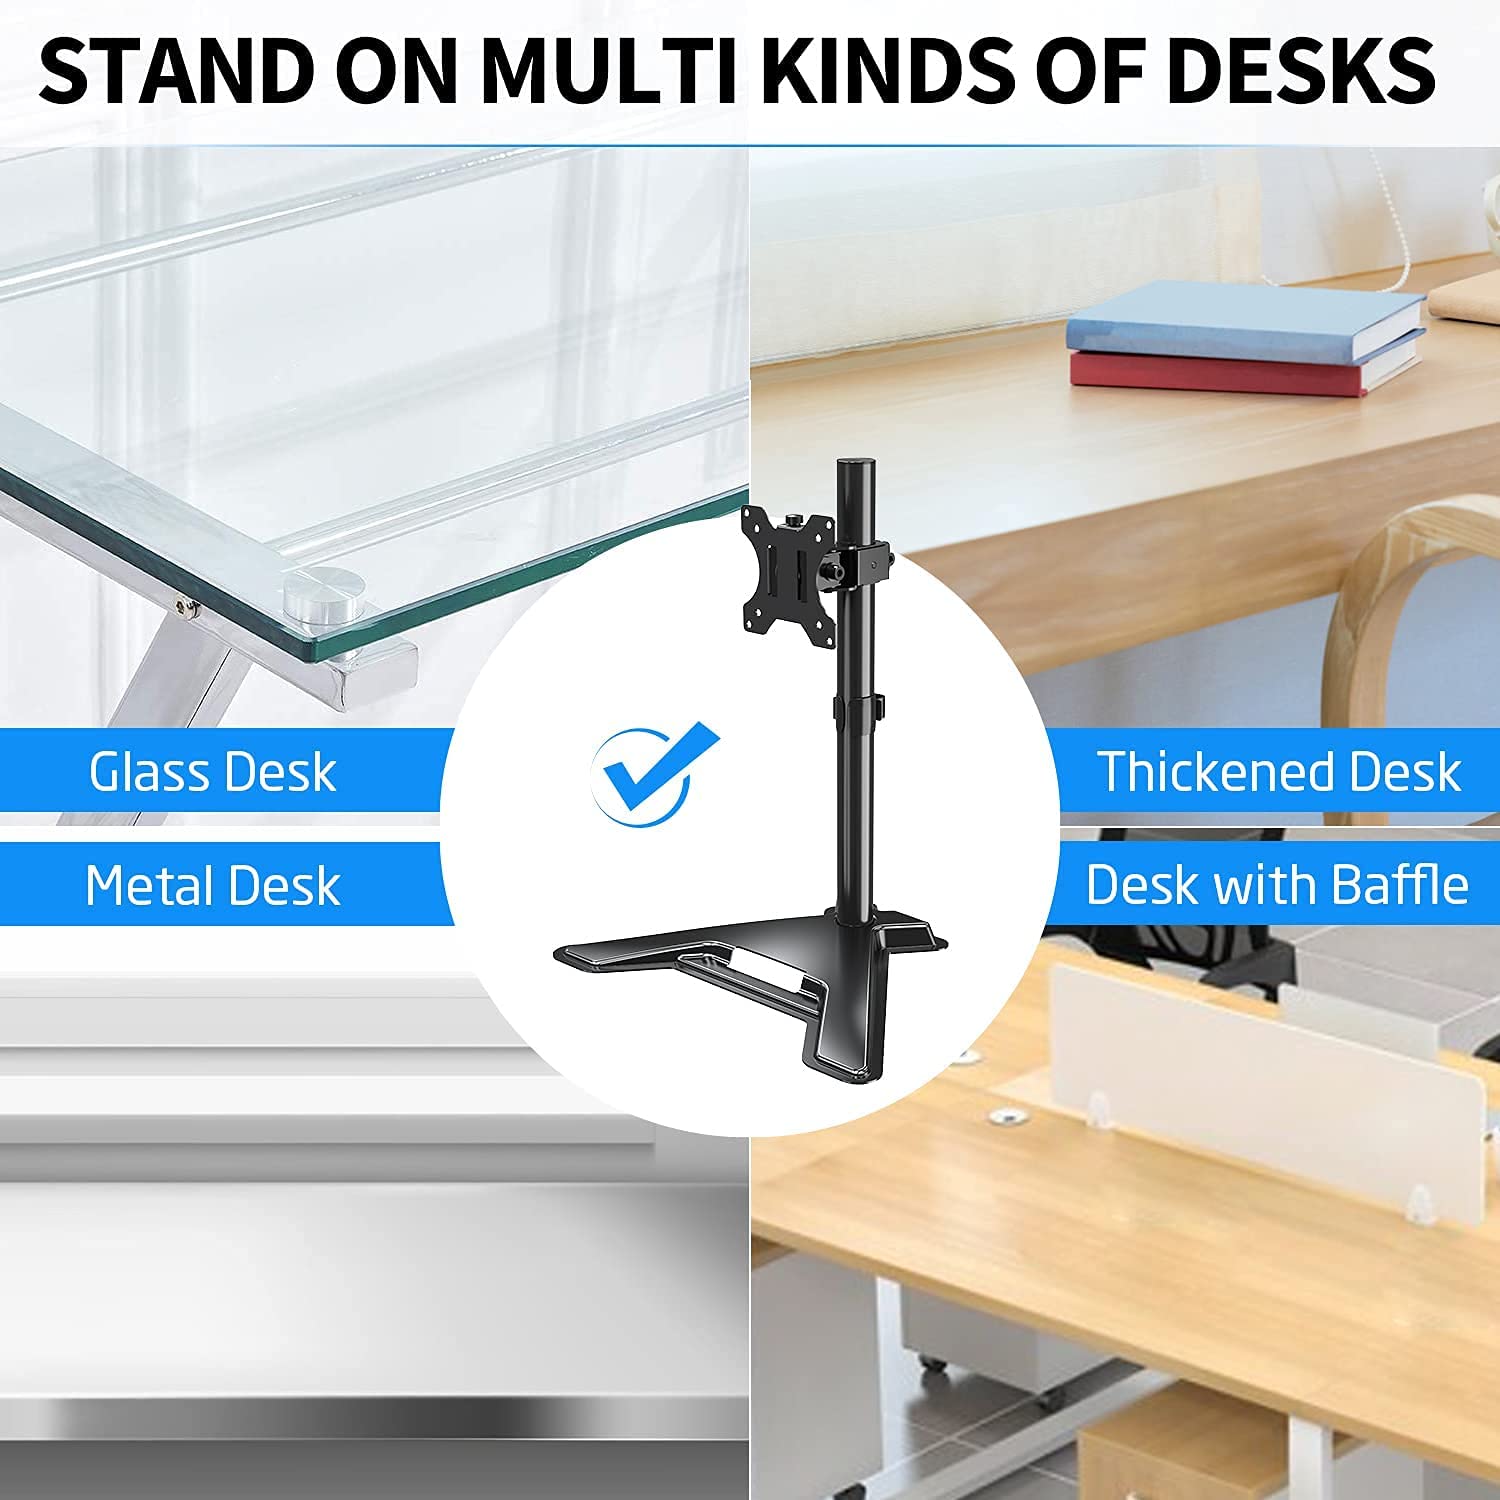 freestanding single monitor stand stands on different kinds of desks